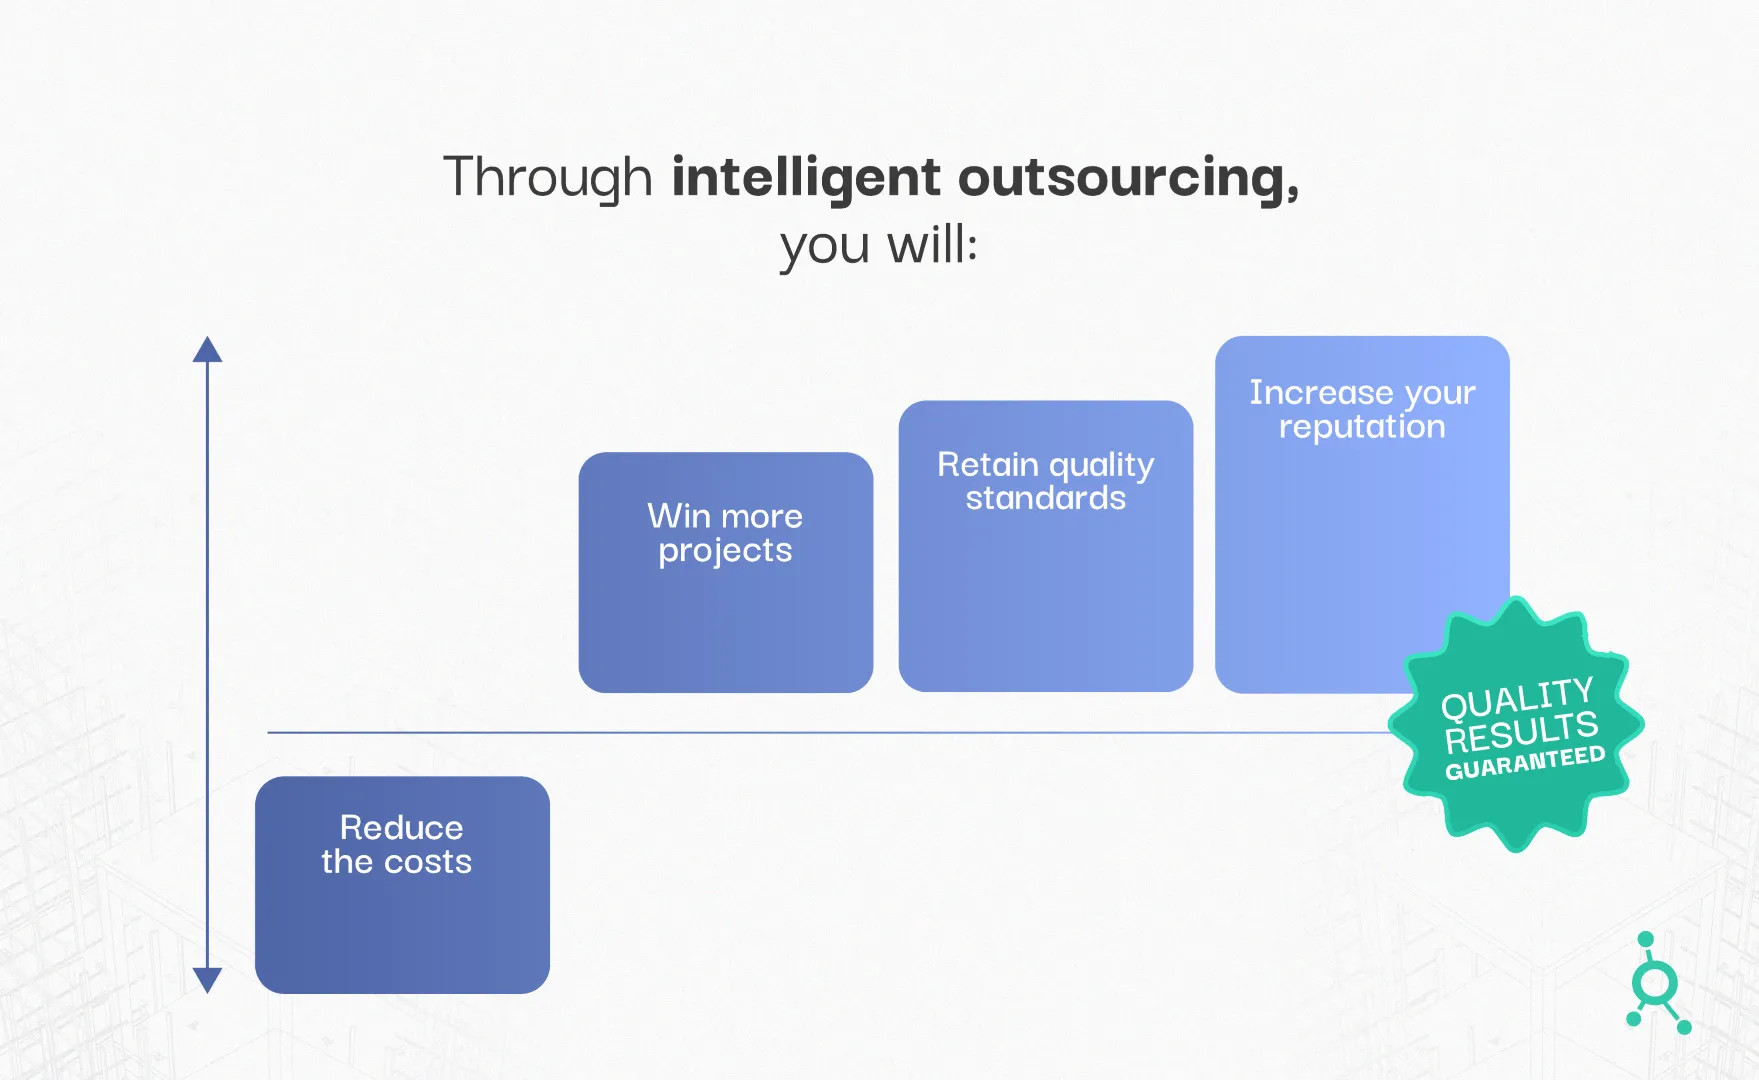 Intelligent outsourcing